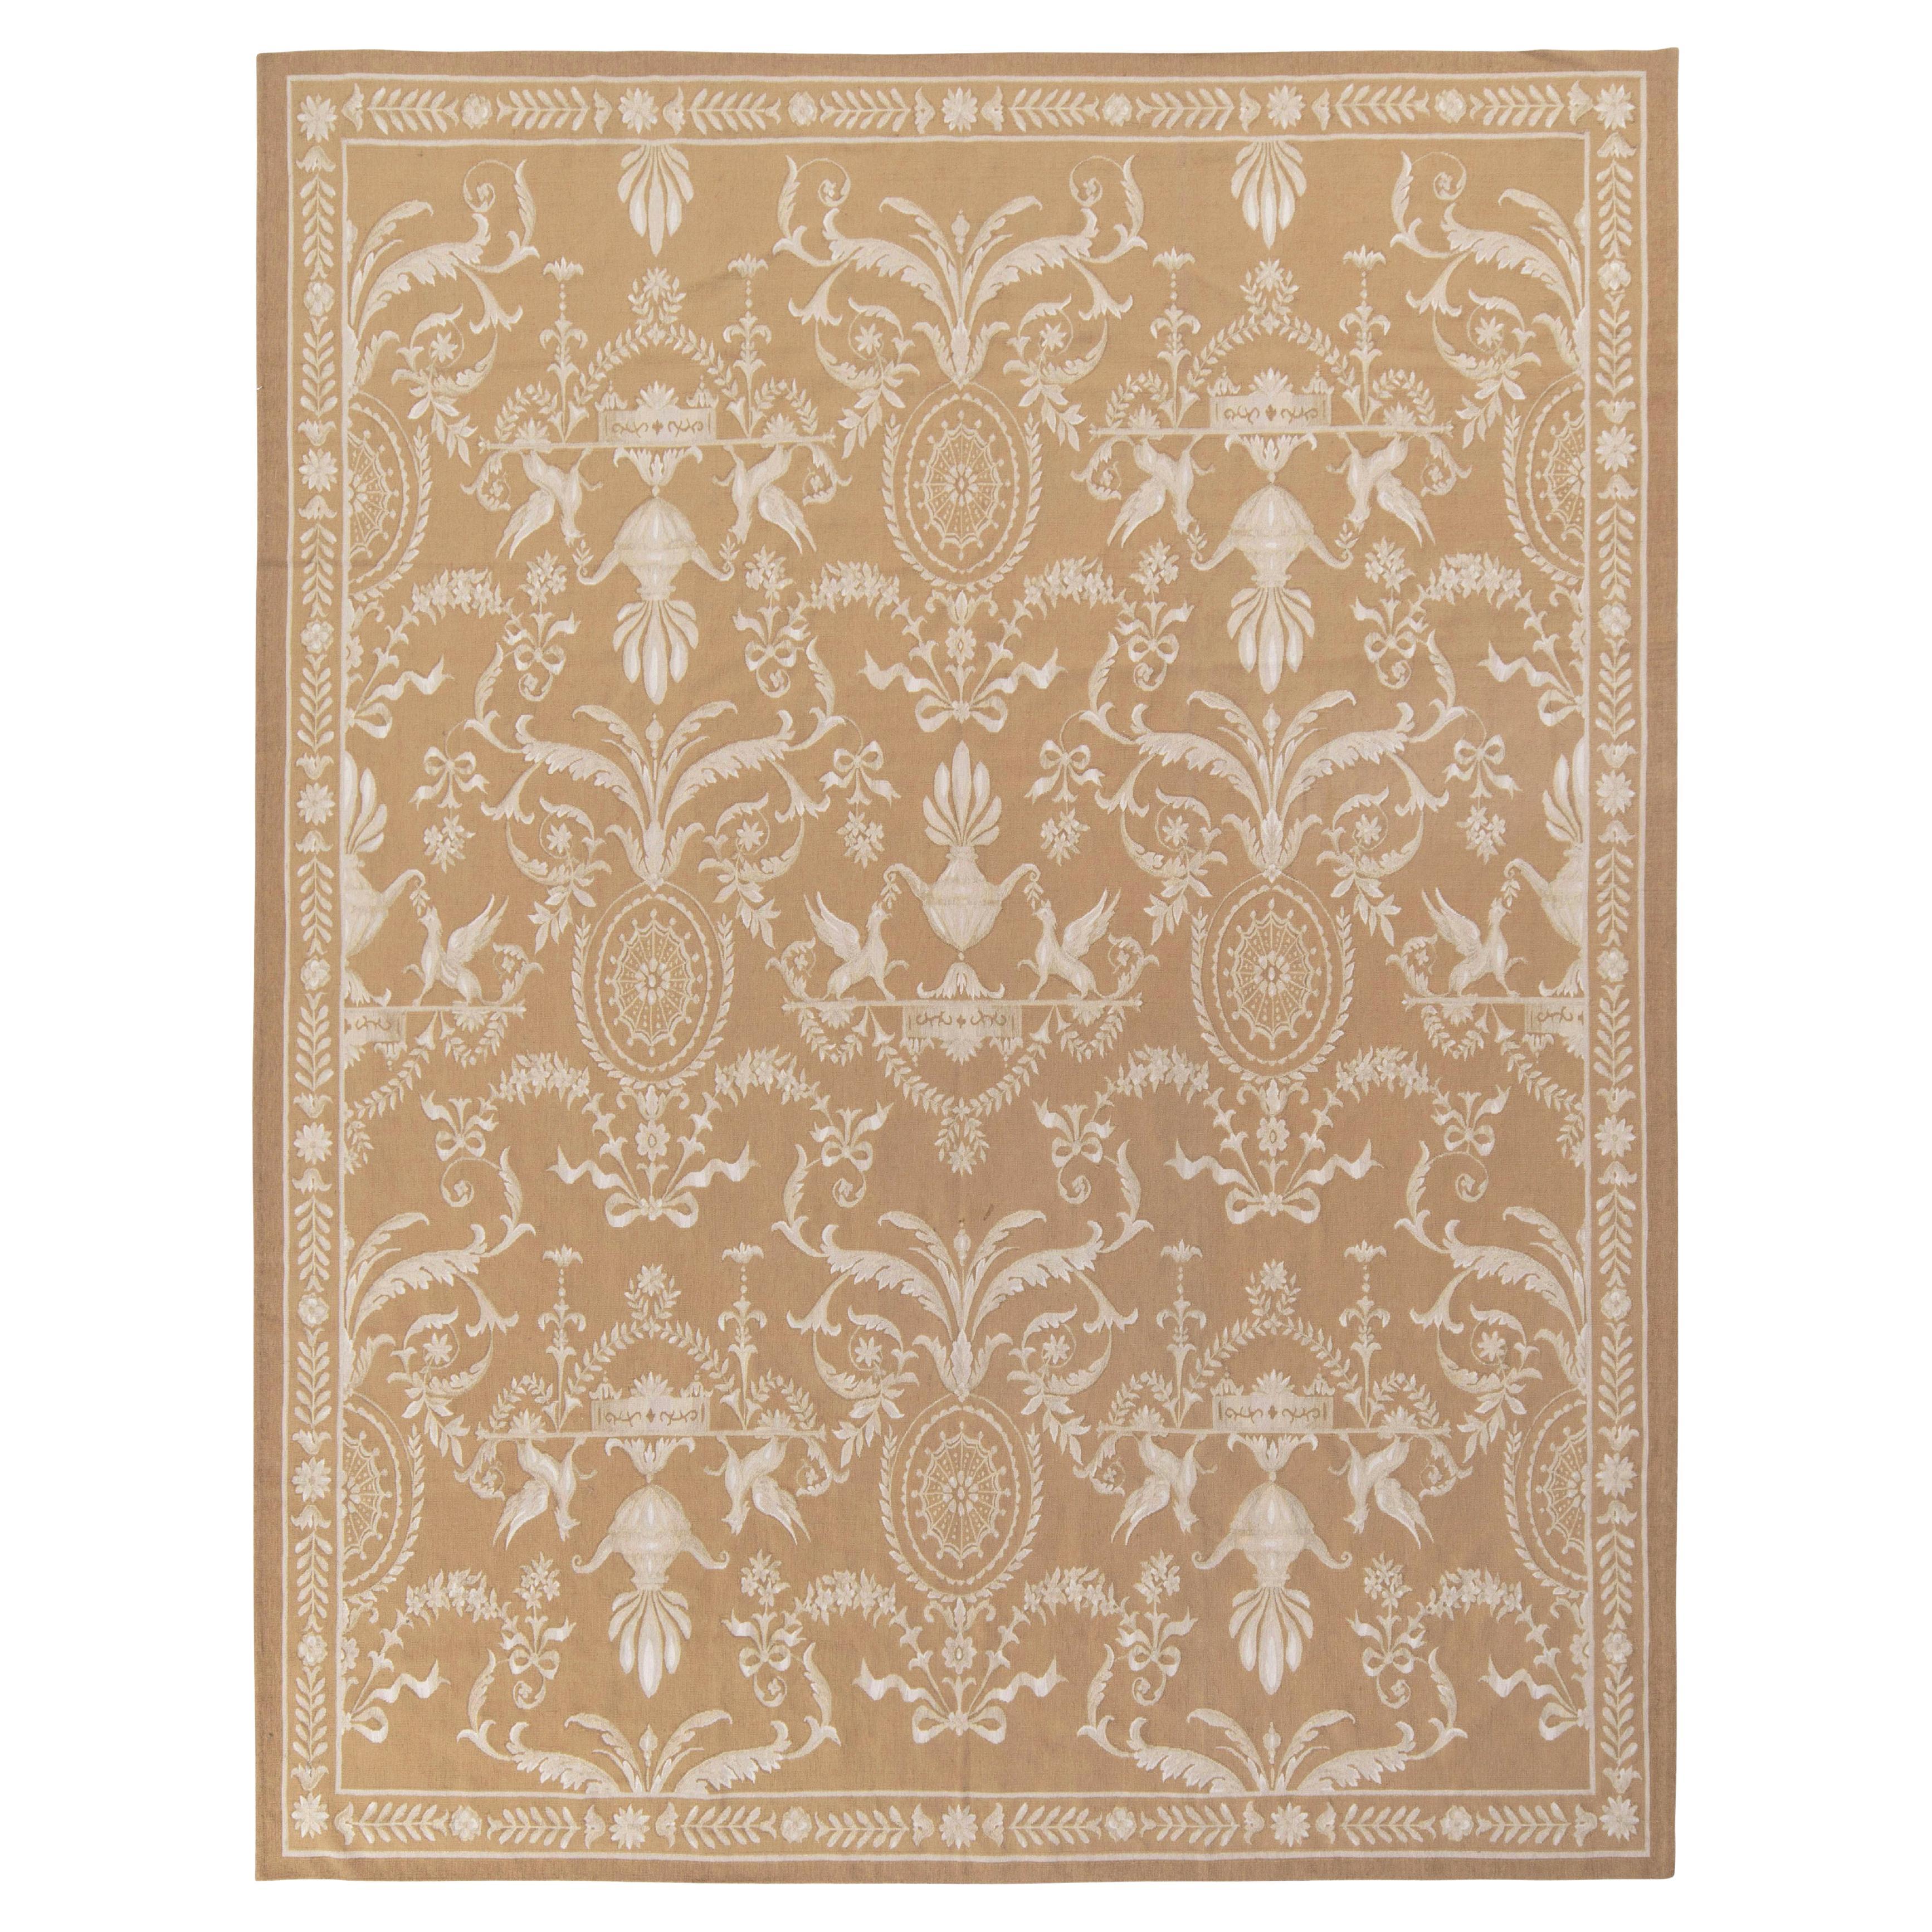 Rug & Kilim's Aubusson Style Flat Weave in Beige-Brown, White Floral Pattern (Tapis & Kilim's Aubusson Style Flat Weave in Beige-Brown, White Floral Pattern)